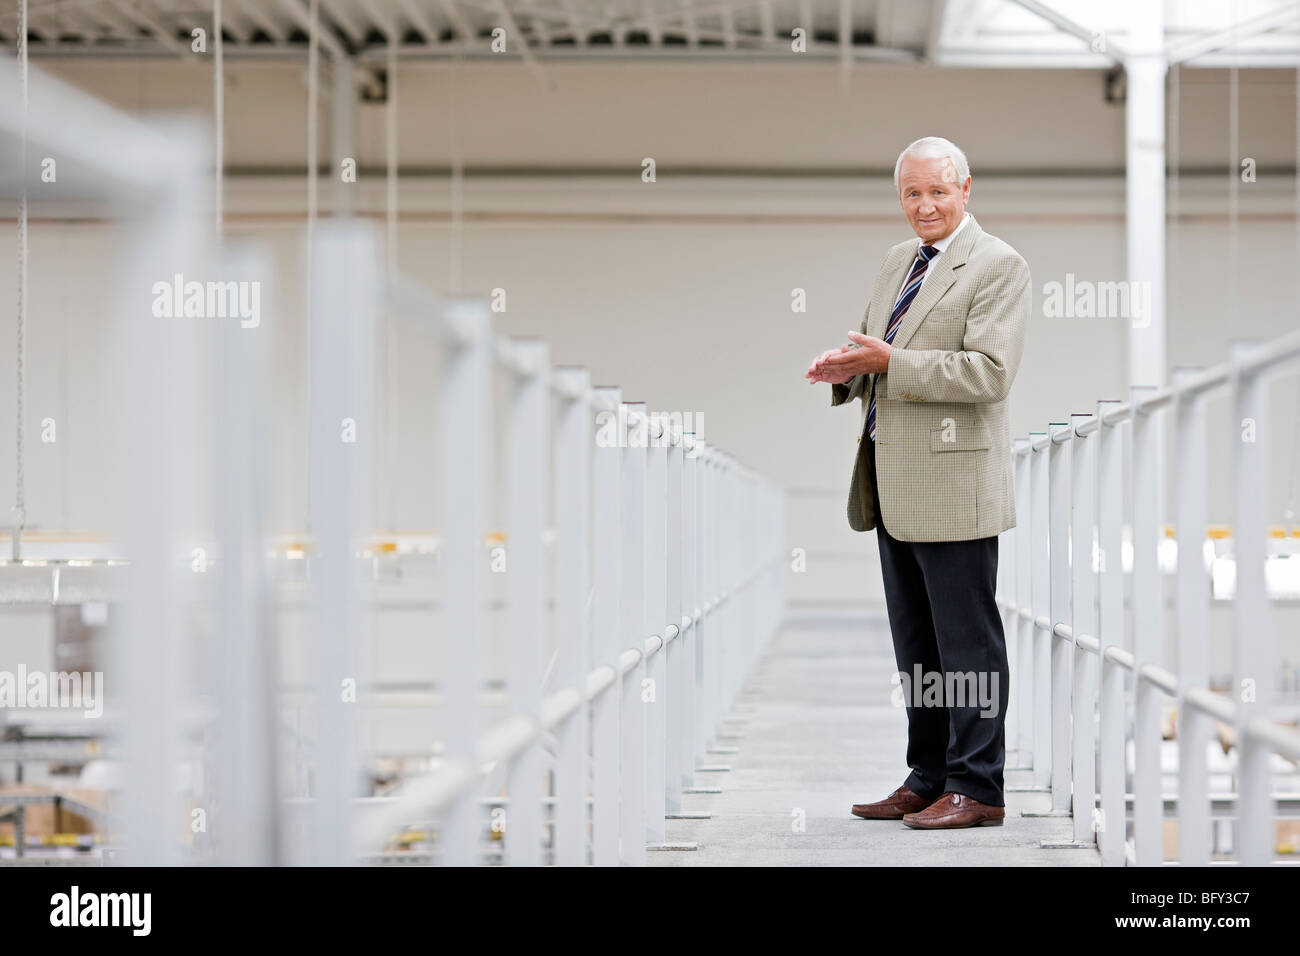 man in charge in storage Stock Photo